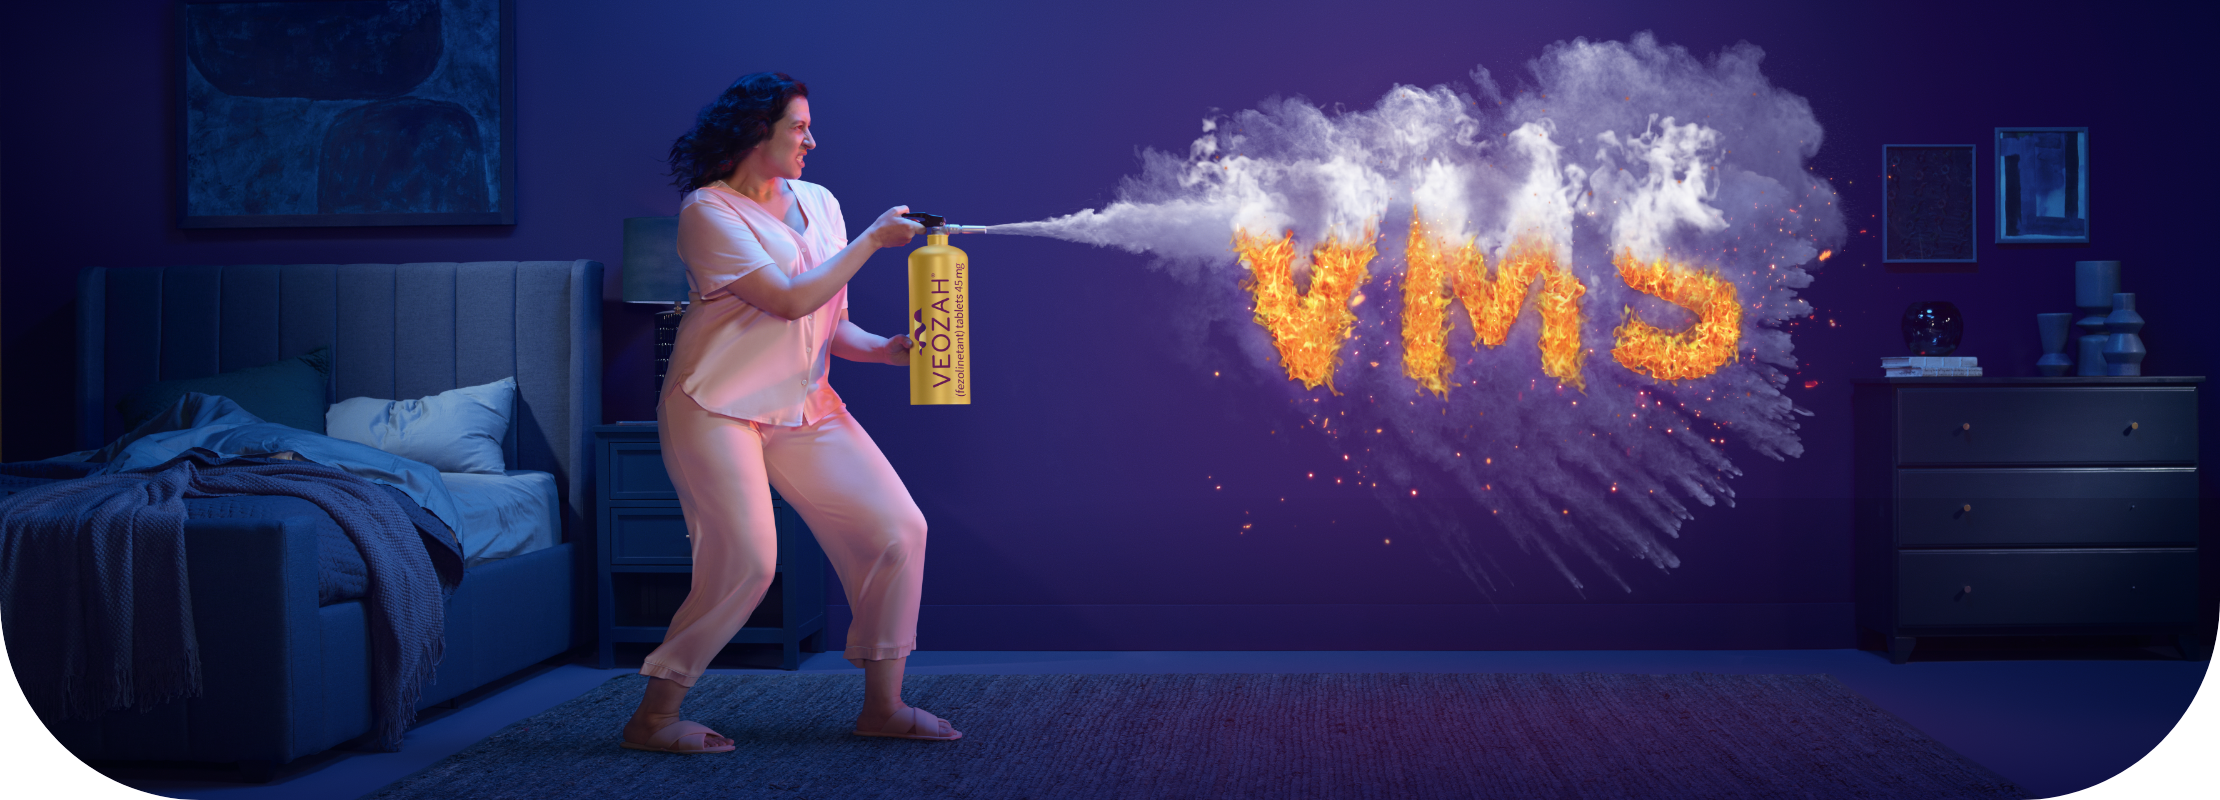 Woman spraying VEOZAH® (fezolinetant) logo fire extinguisher at VMS fire in bedroom 